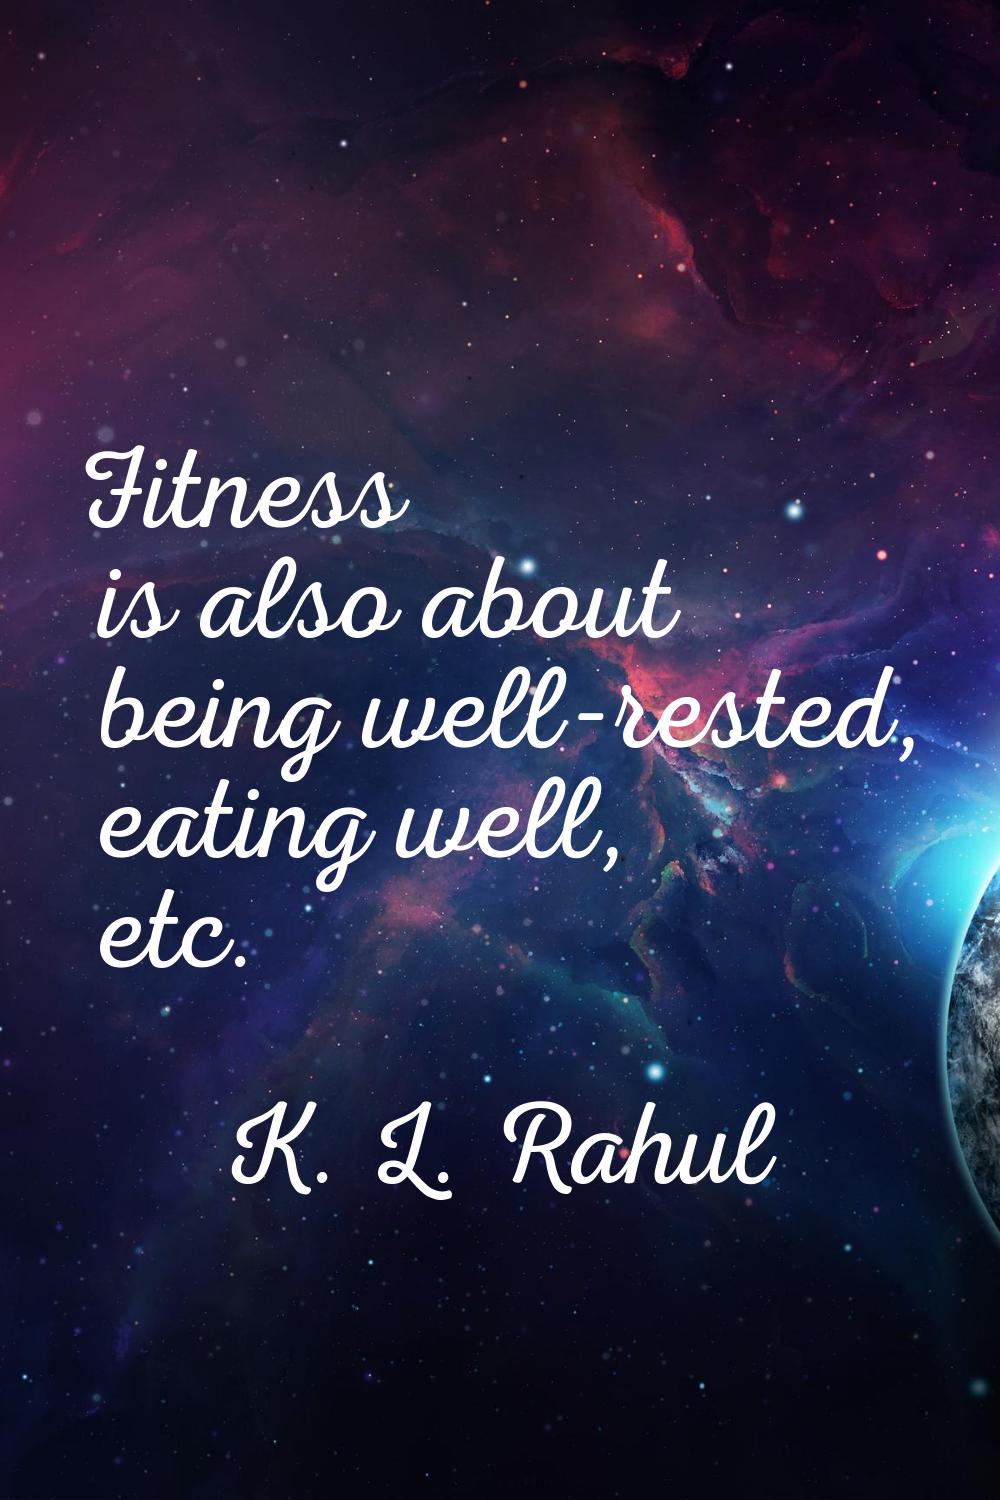 Fitness is also about being well-rested, eating well, etc.